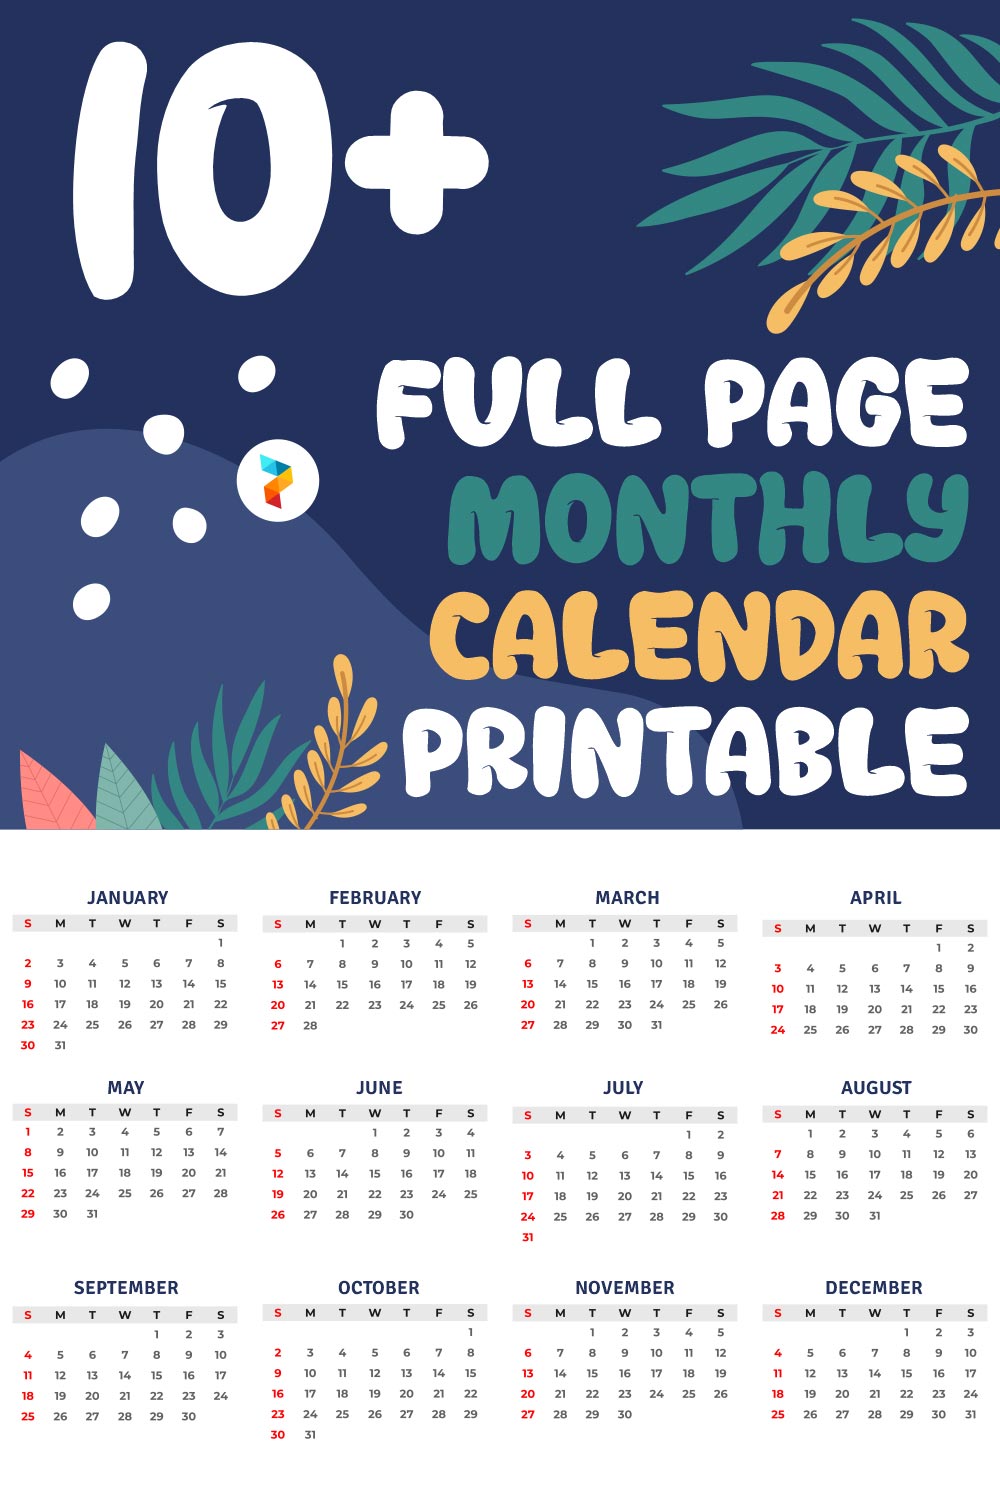 Full Page Monthly Calendar Printable